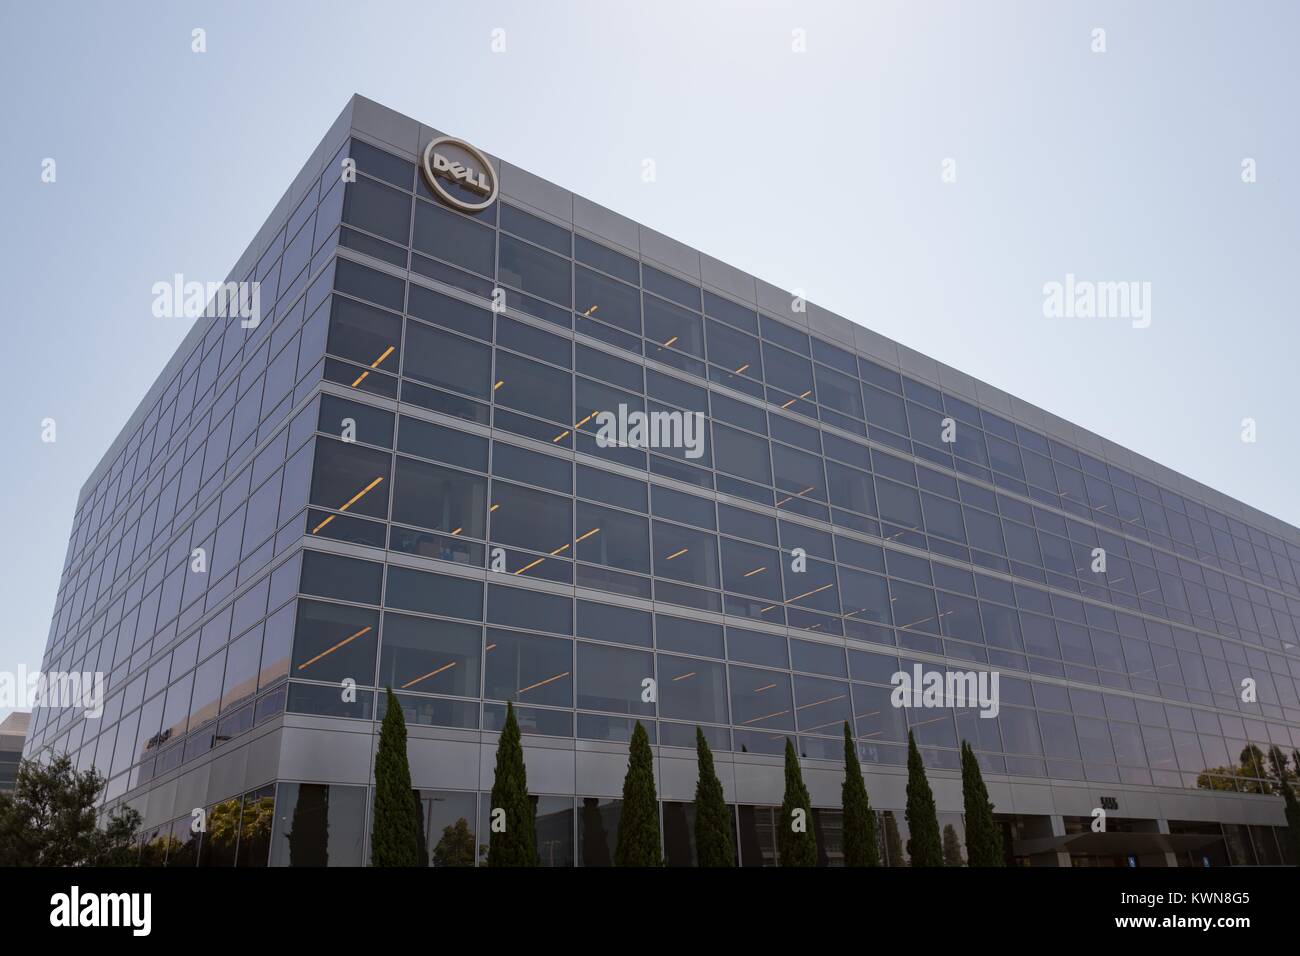 Regional headquarters, with logo and signage, for Dell Computers in the Silicon Valley town of Santa Clara, California, July 25, 2017. Stock Photo